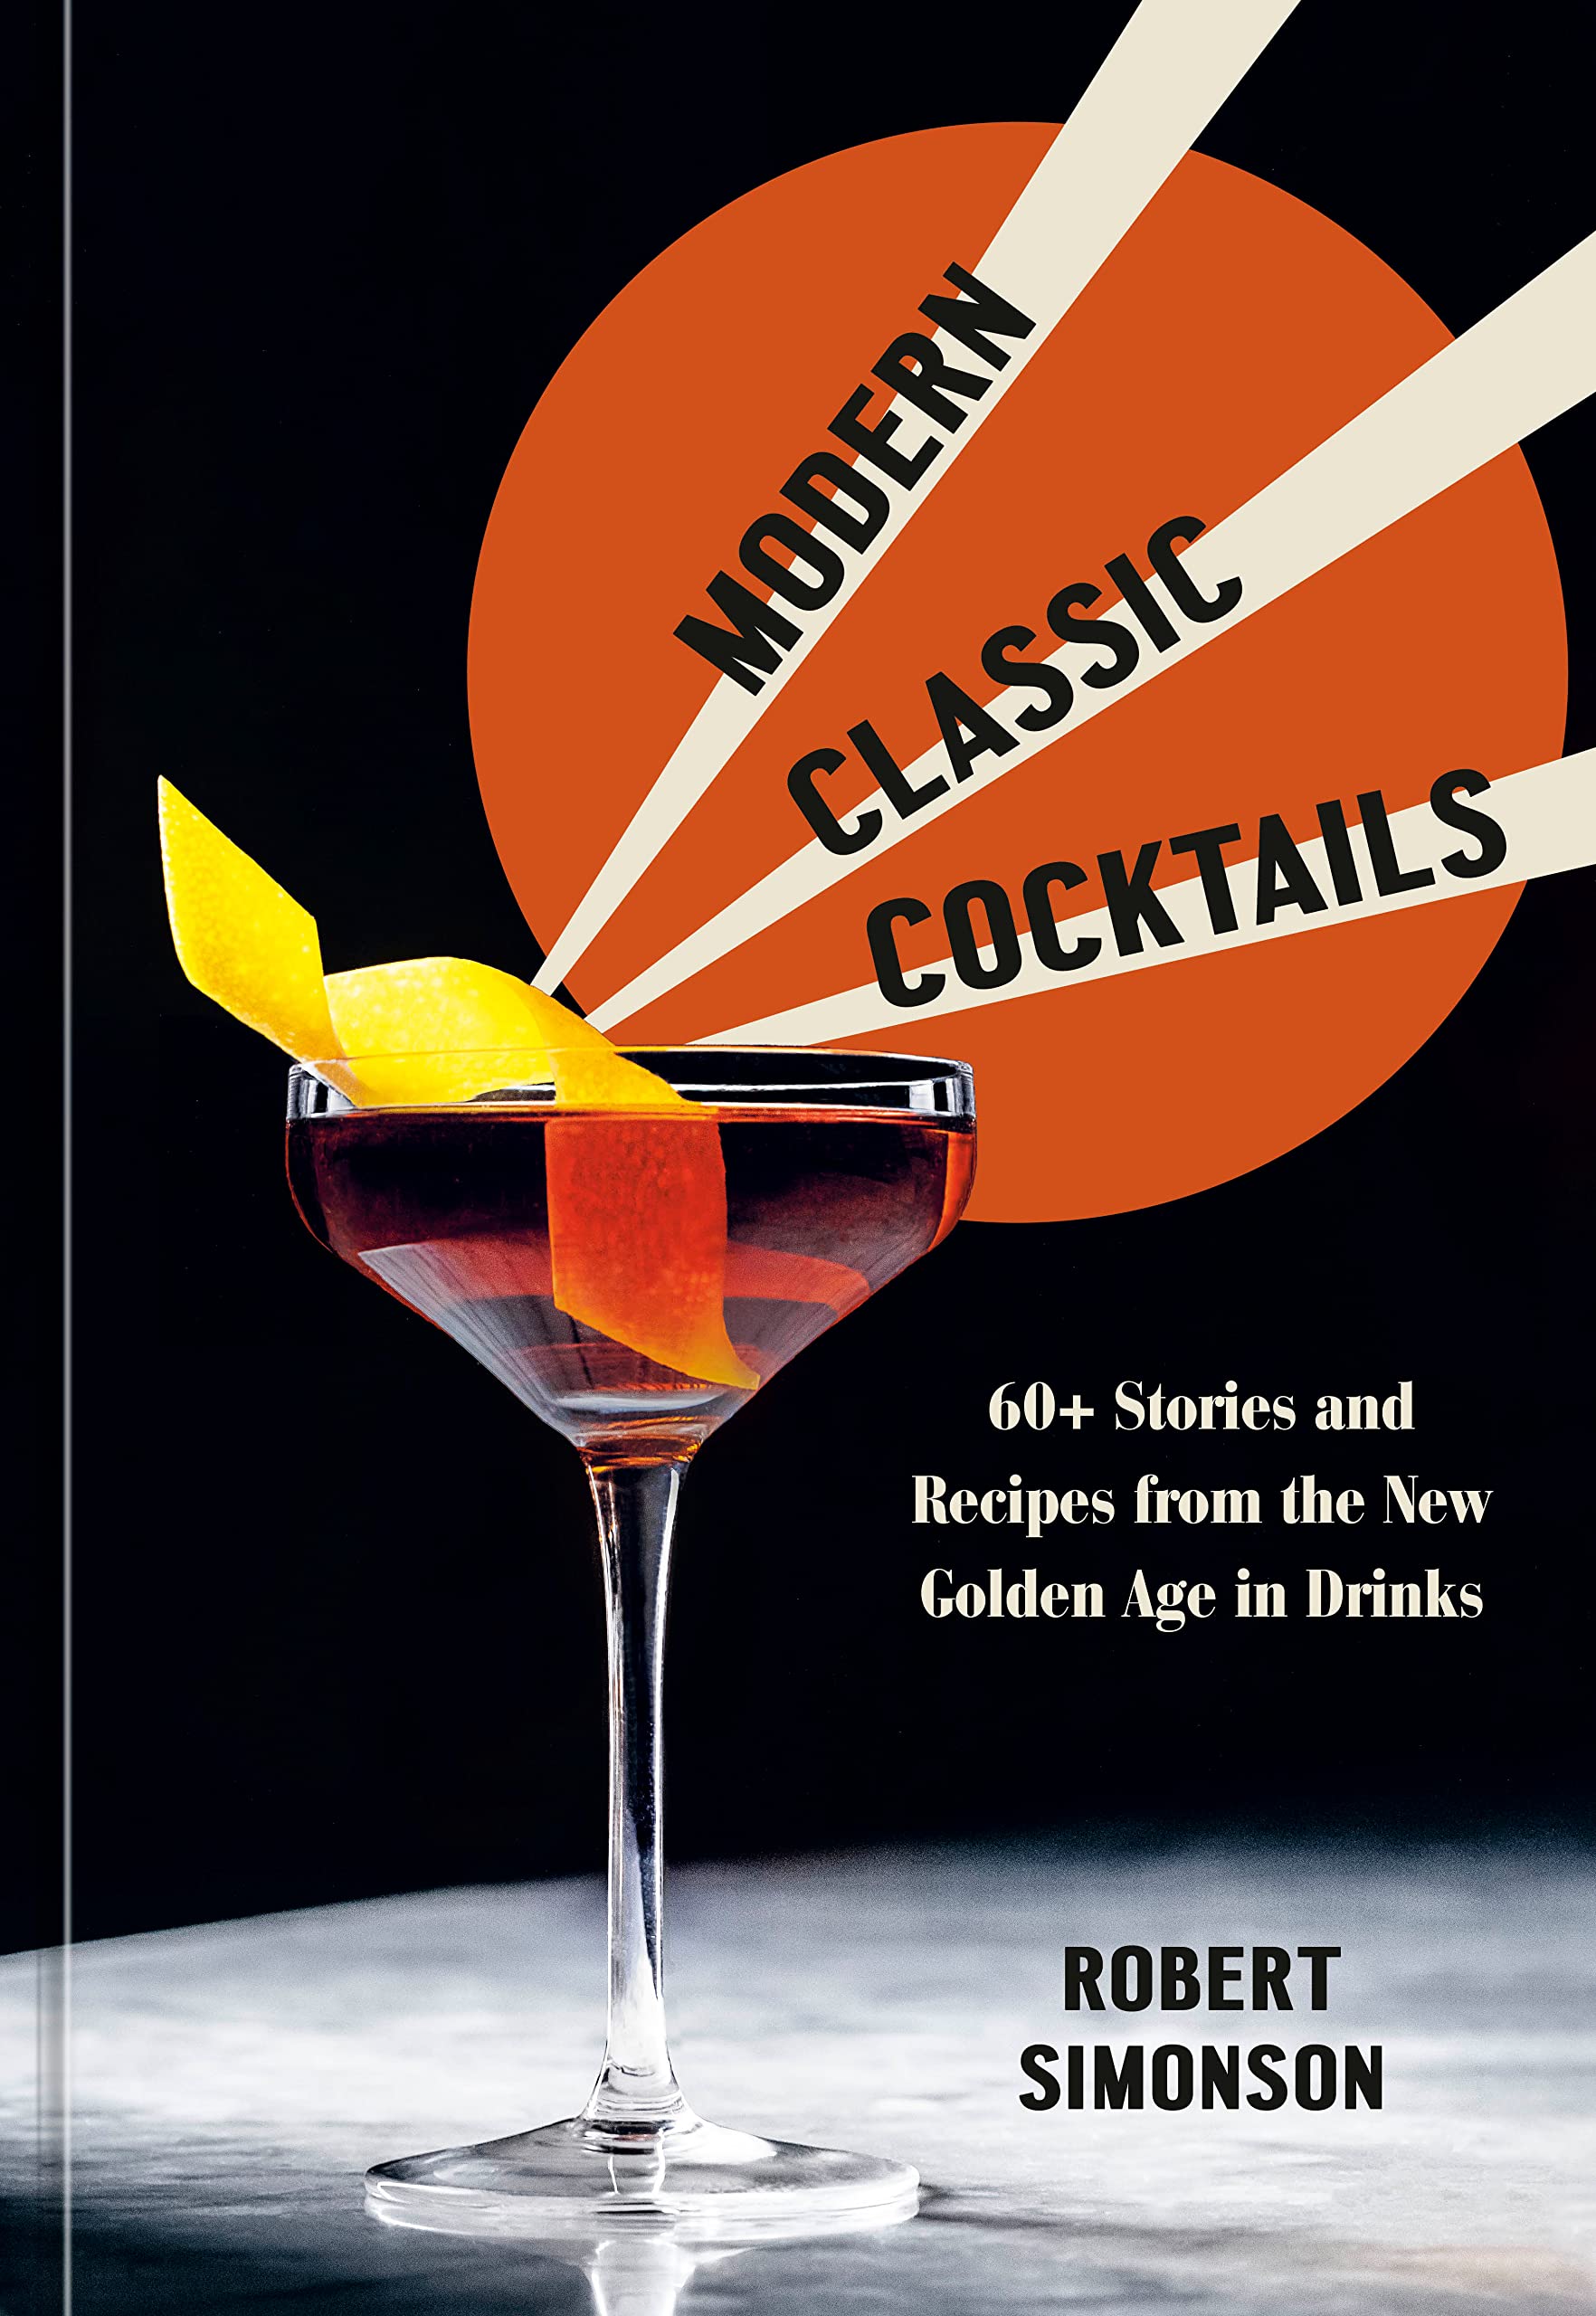 Modern Classic Cocktails: 60+ Stories and Recipes from the New Golden Age in Drinks (Robert Simonson) *Signed*